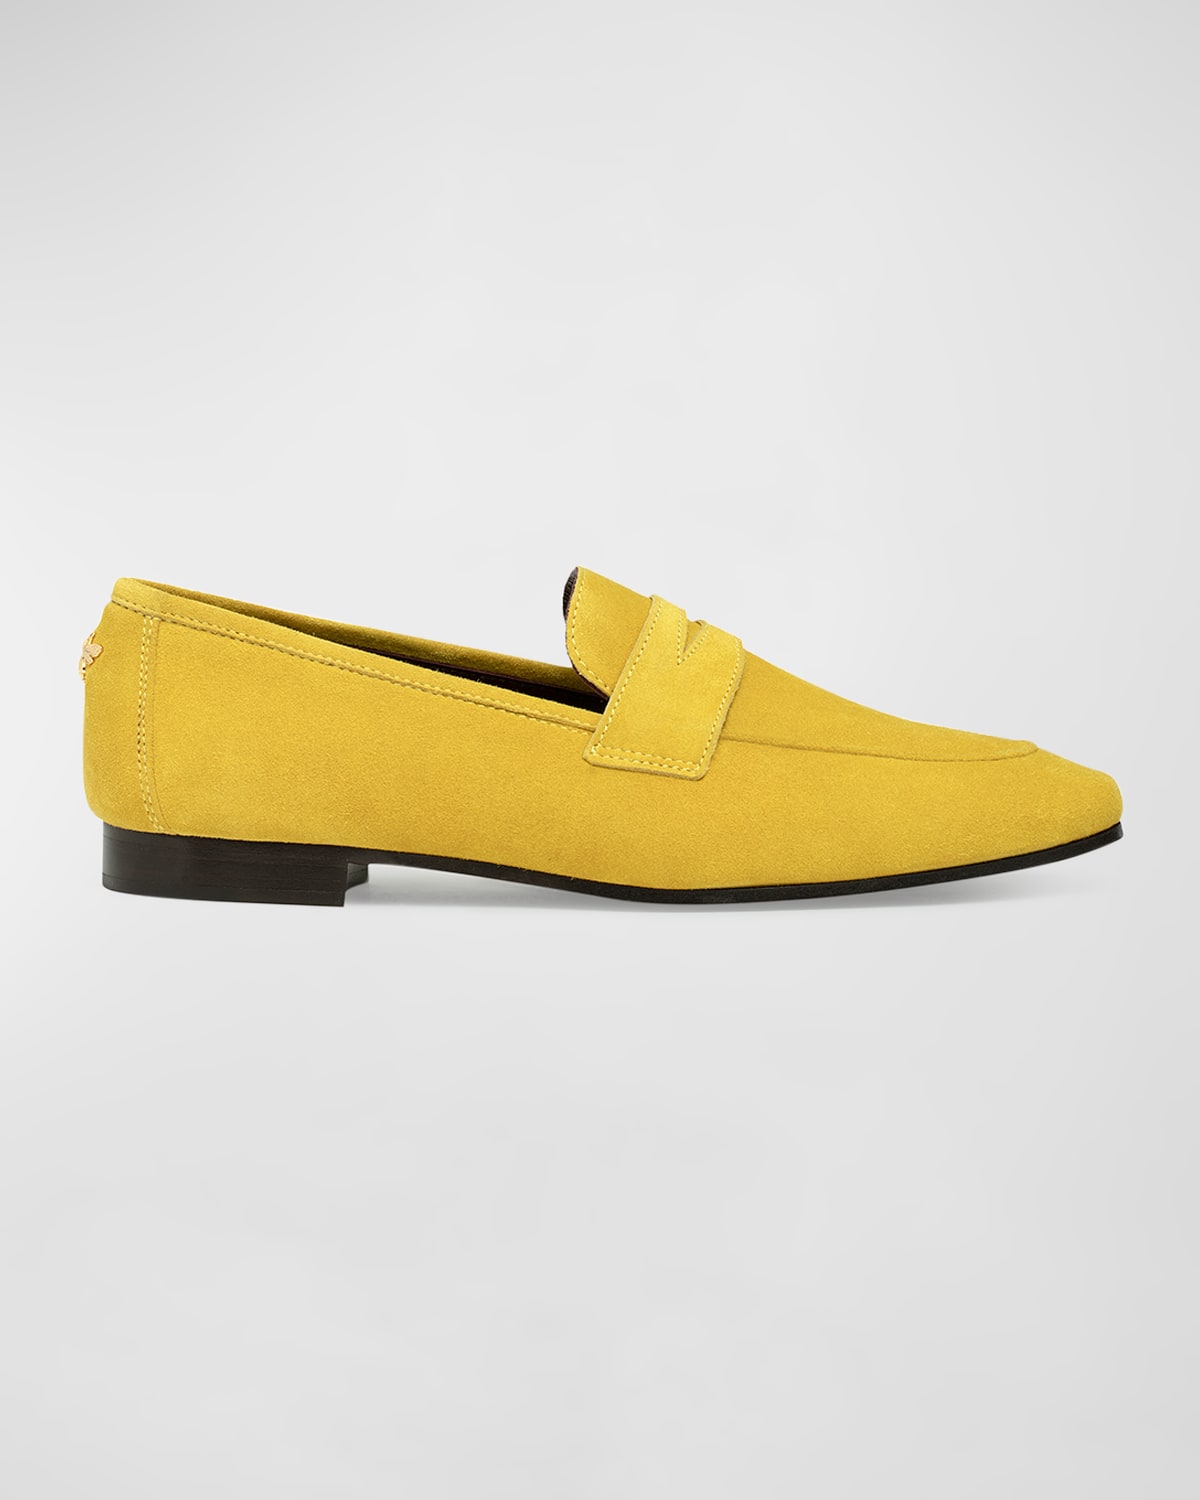 Bougeotte Suede Flat Penny Loafers